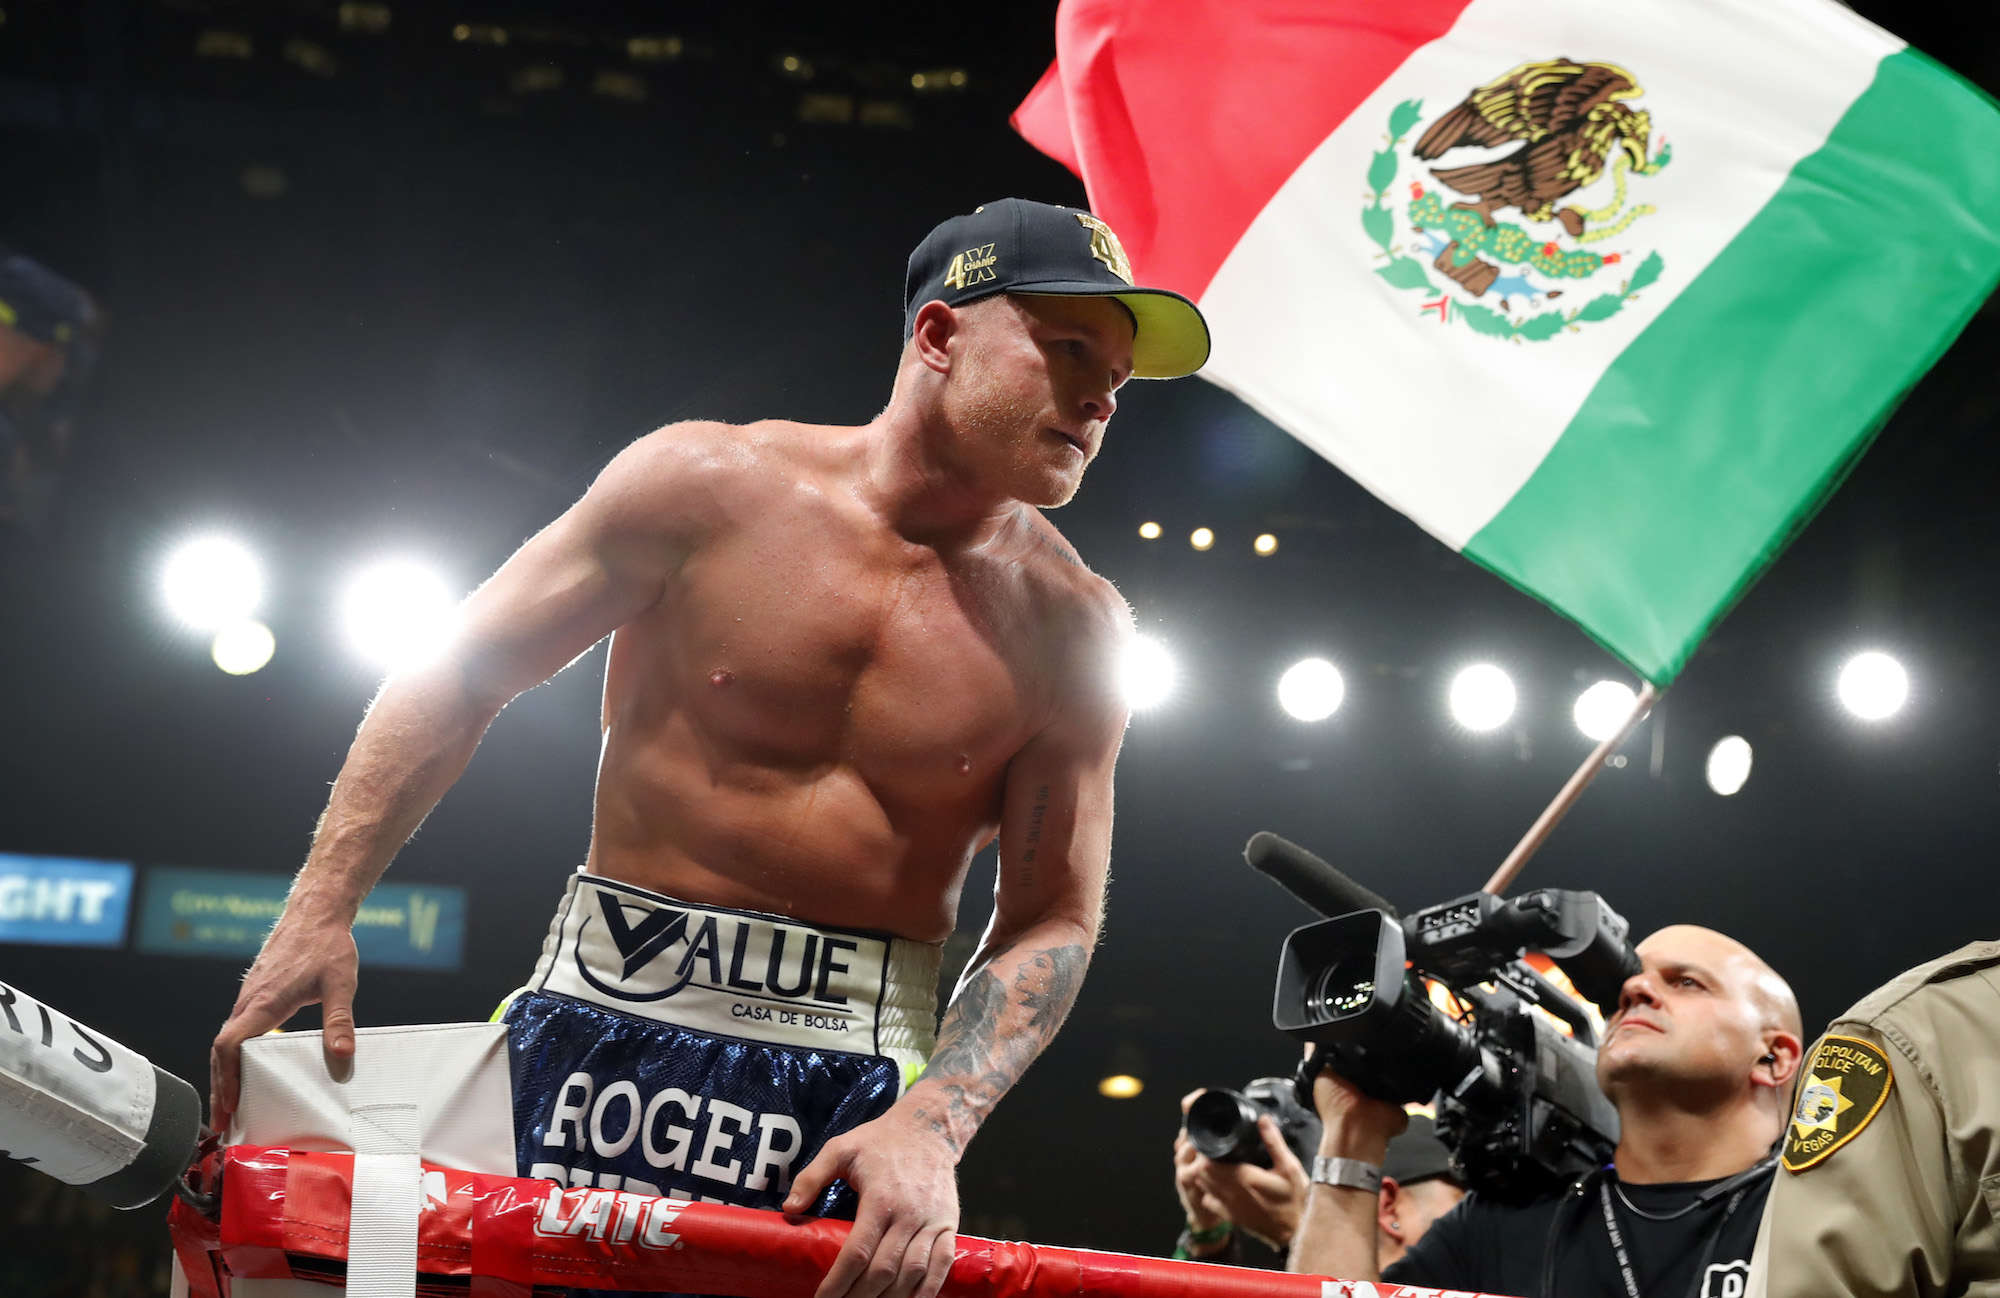 1 Saul 'Canelo' Alvarez — 53 wins (36 knockouts) against one loss and